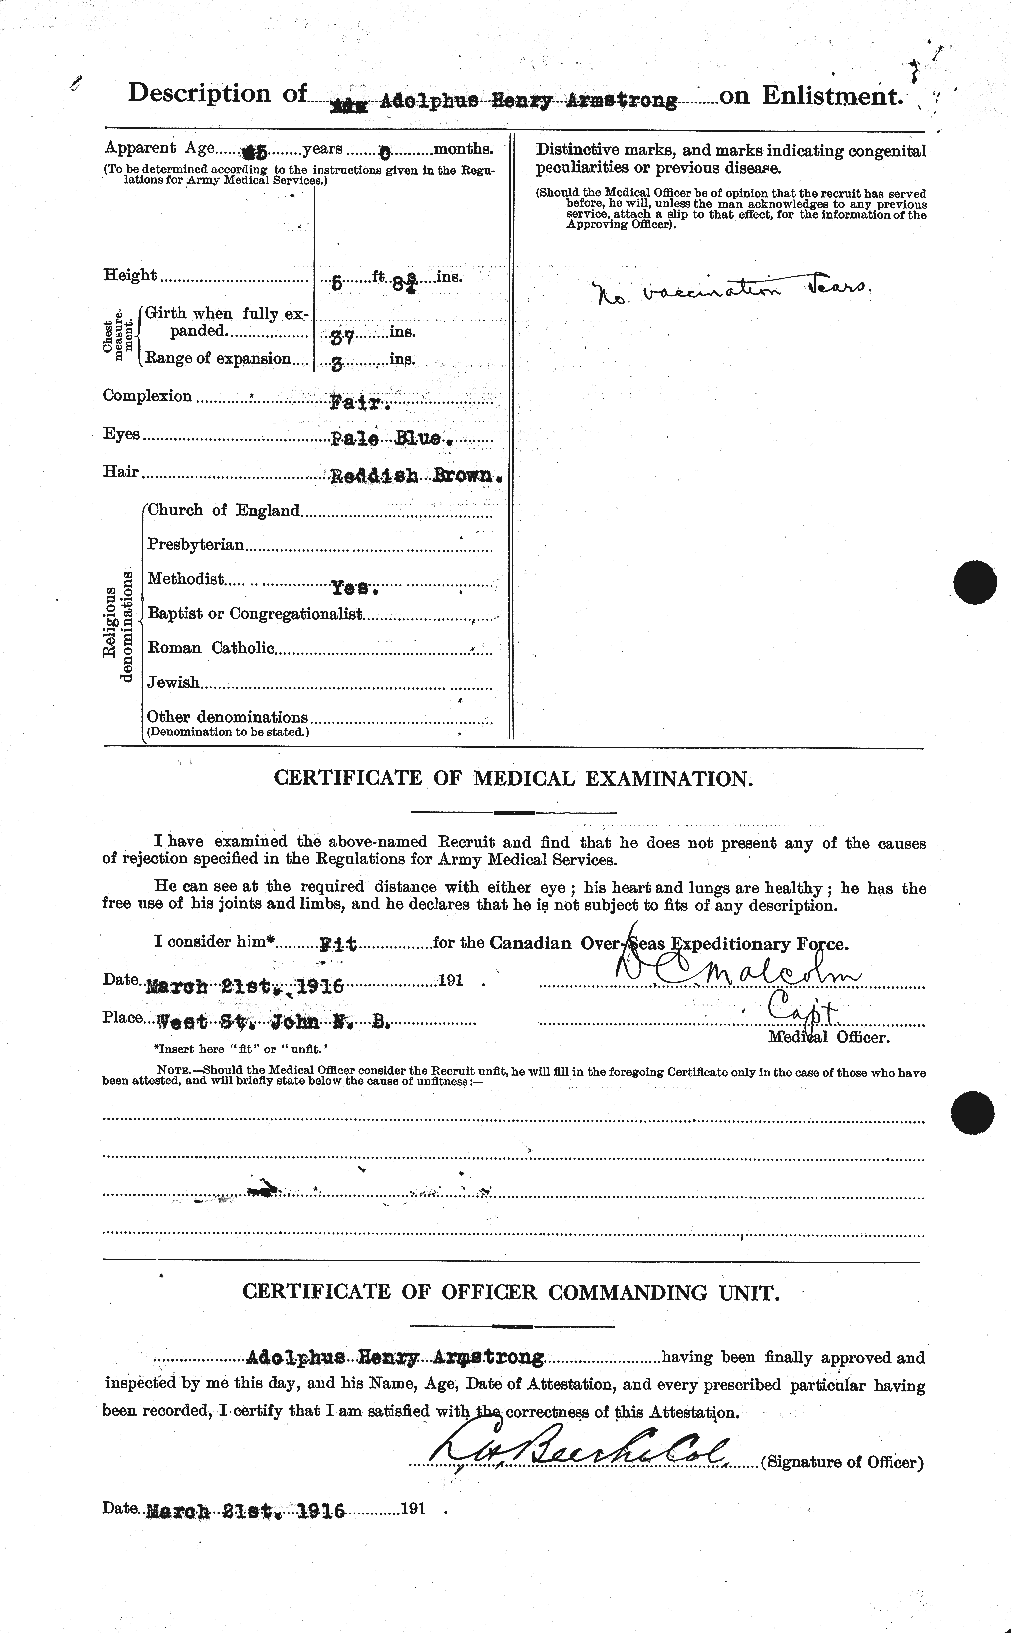 Personnel Records of the First World War - CEF 214001b